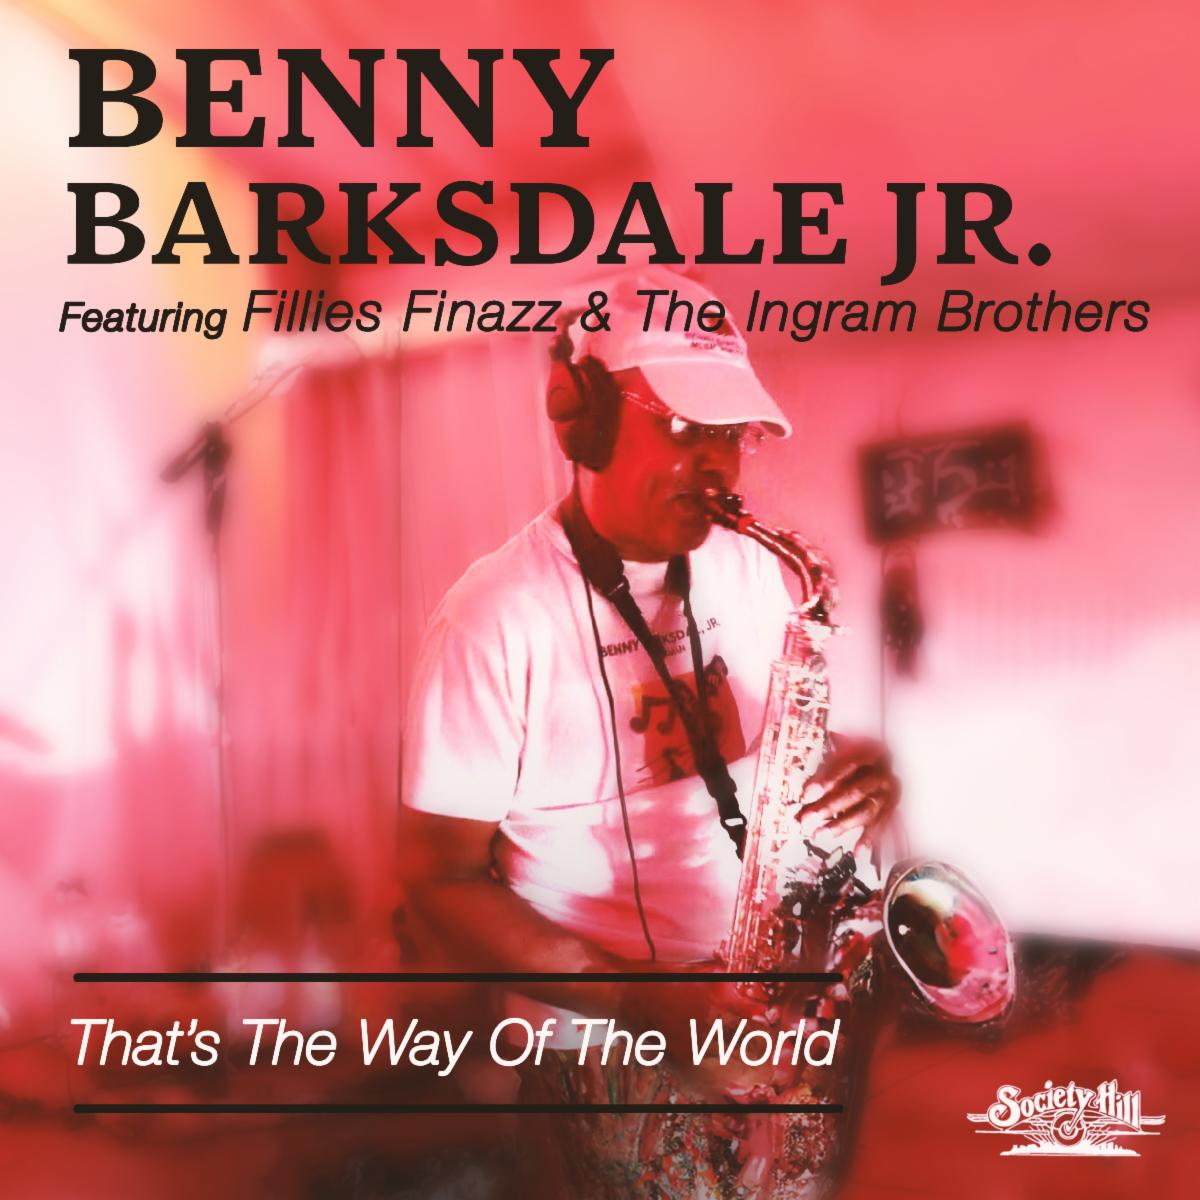 Benny Barksdale Jr. ‘That’s the Way of the World (Remix)’ – LISTEN